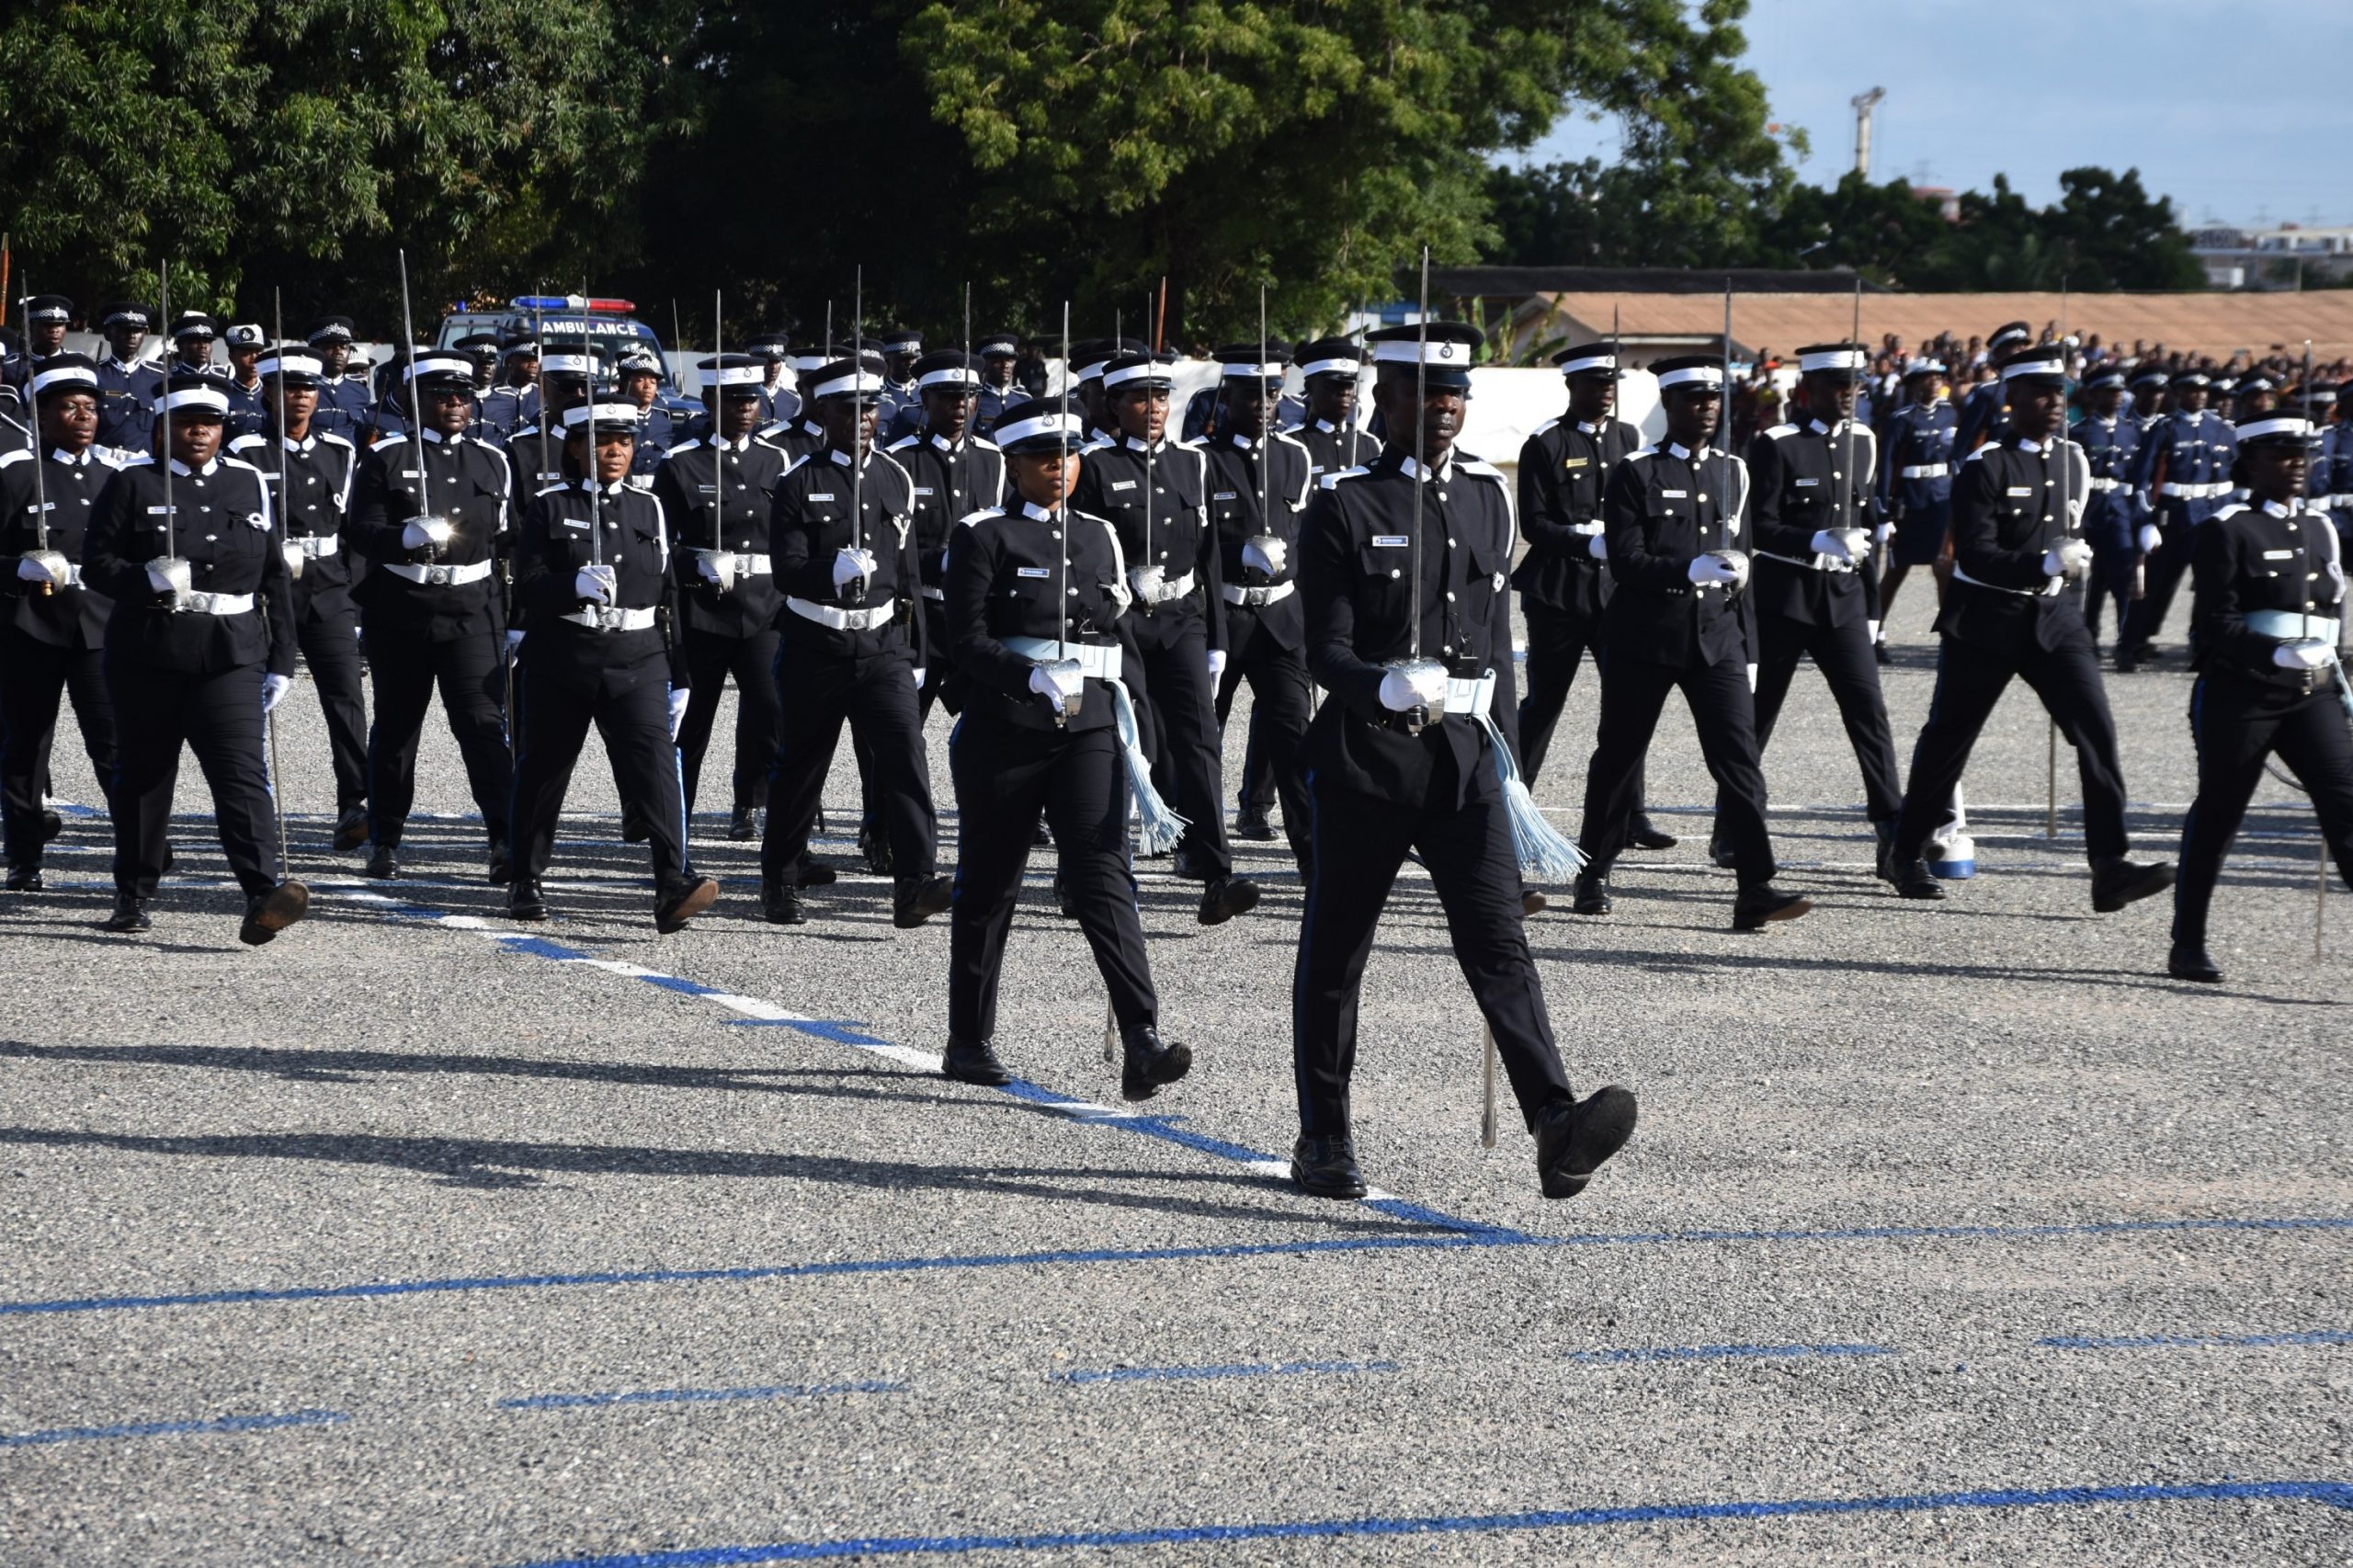 ghana-promotes-over-6-000-police-officers-ahead-of-polls-dailymailgh